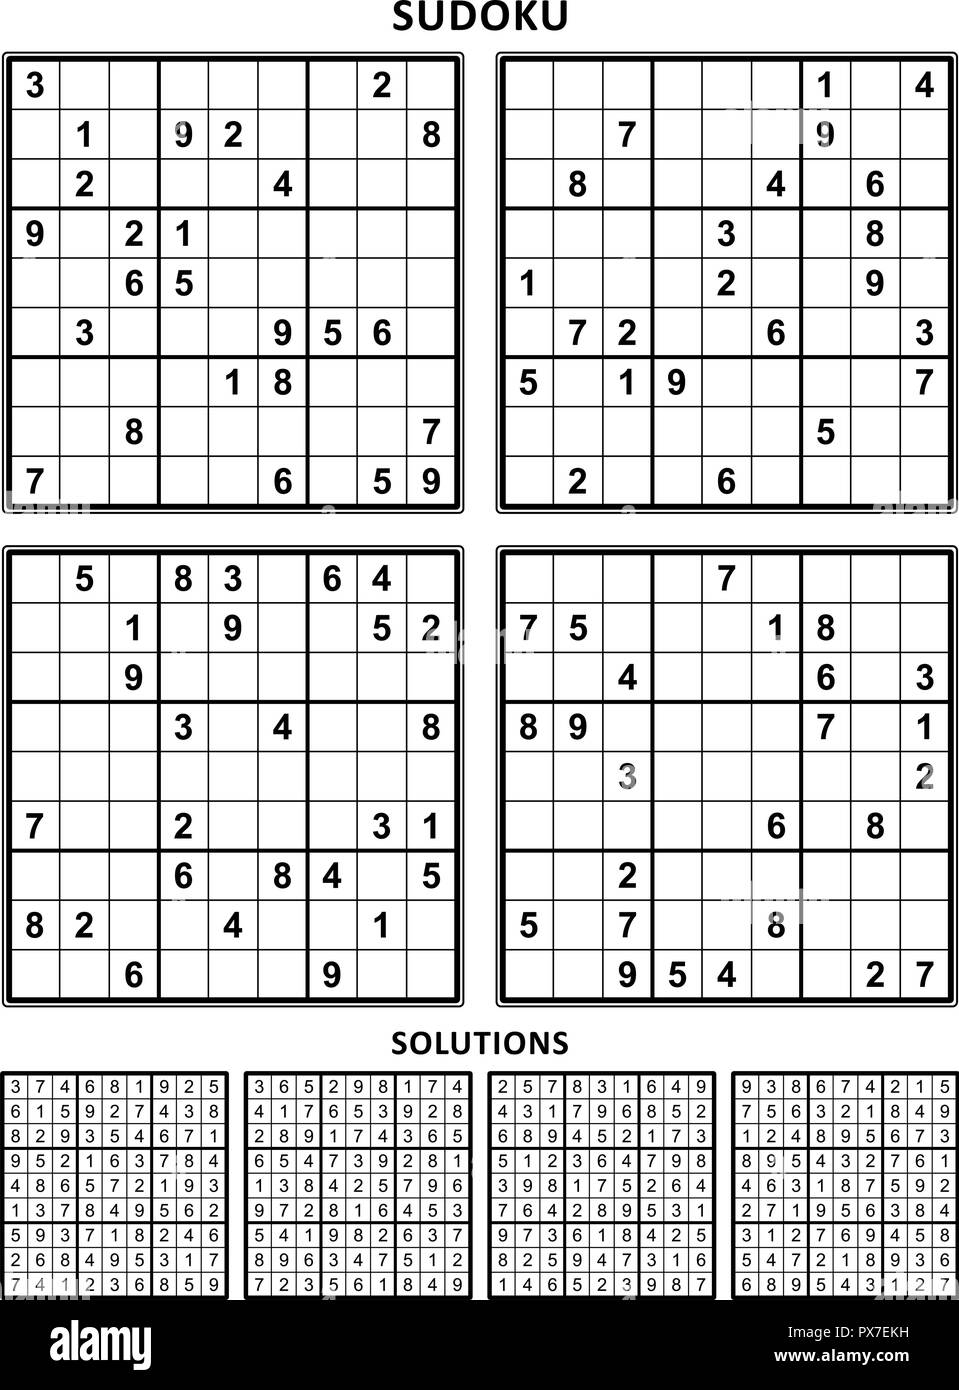 four-sudoku-puzzles-of-comfortable-easy-yet-not-very-easy-level-suitable-for-large-print